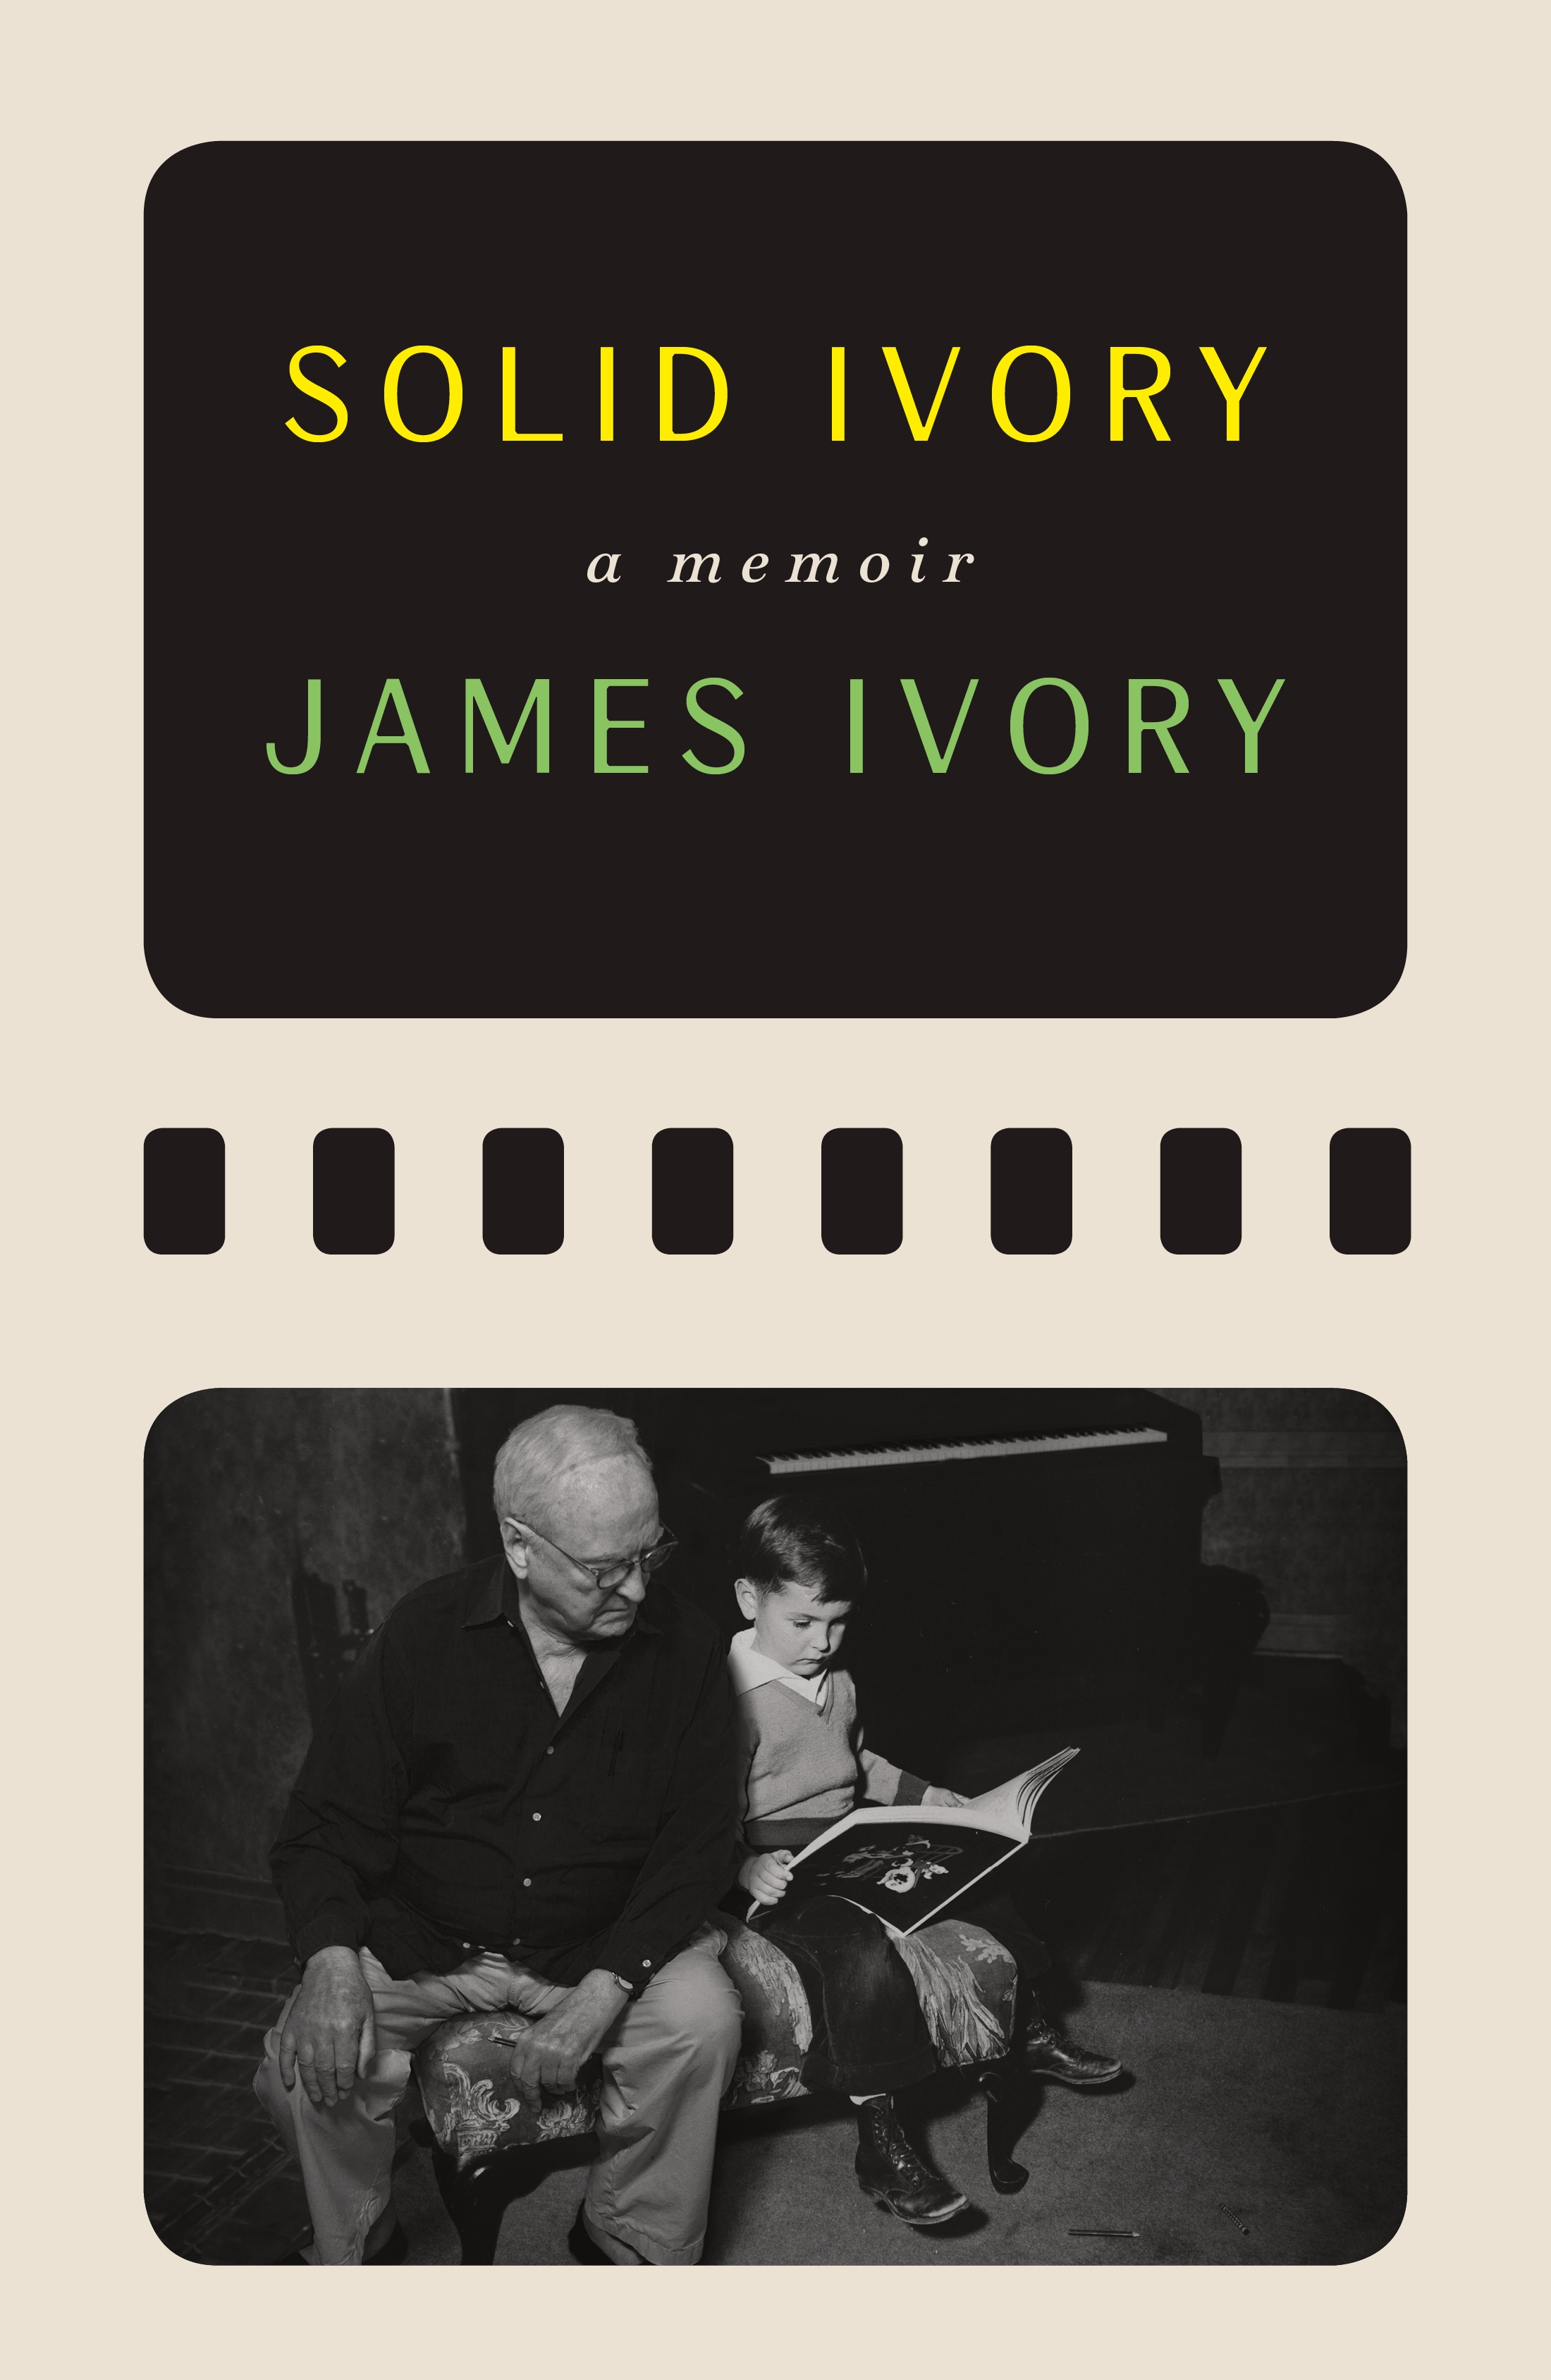 SOLID IVORY by James Ivory